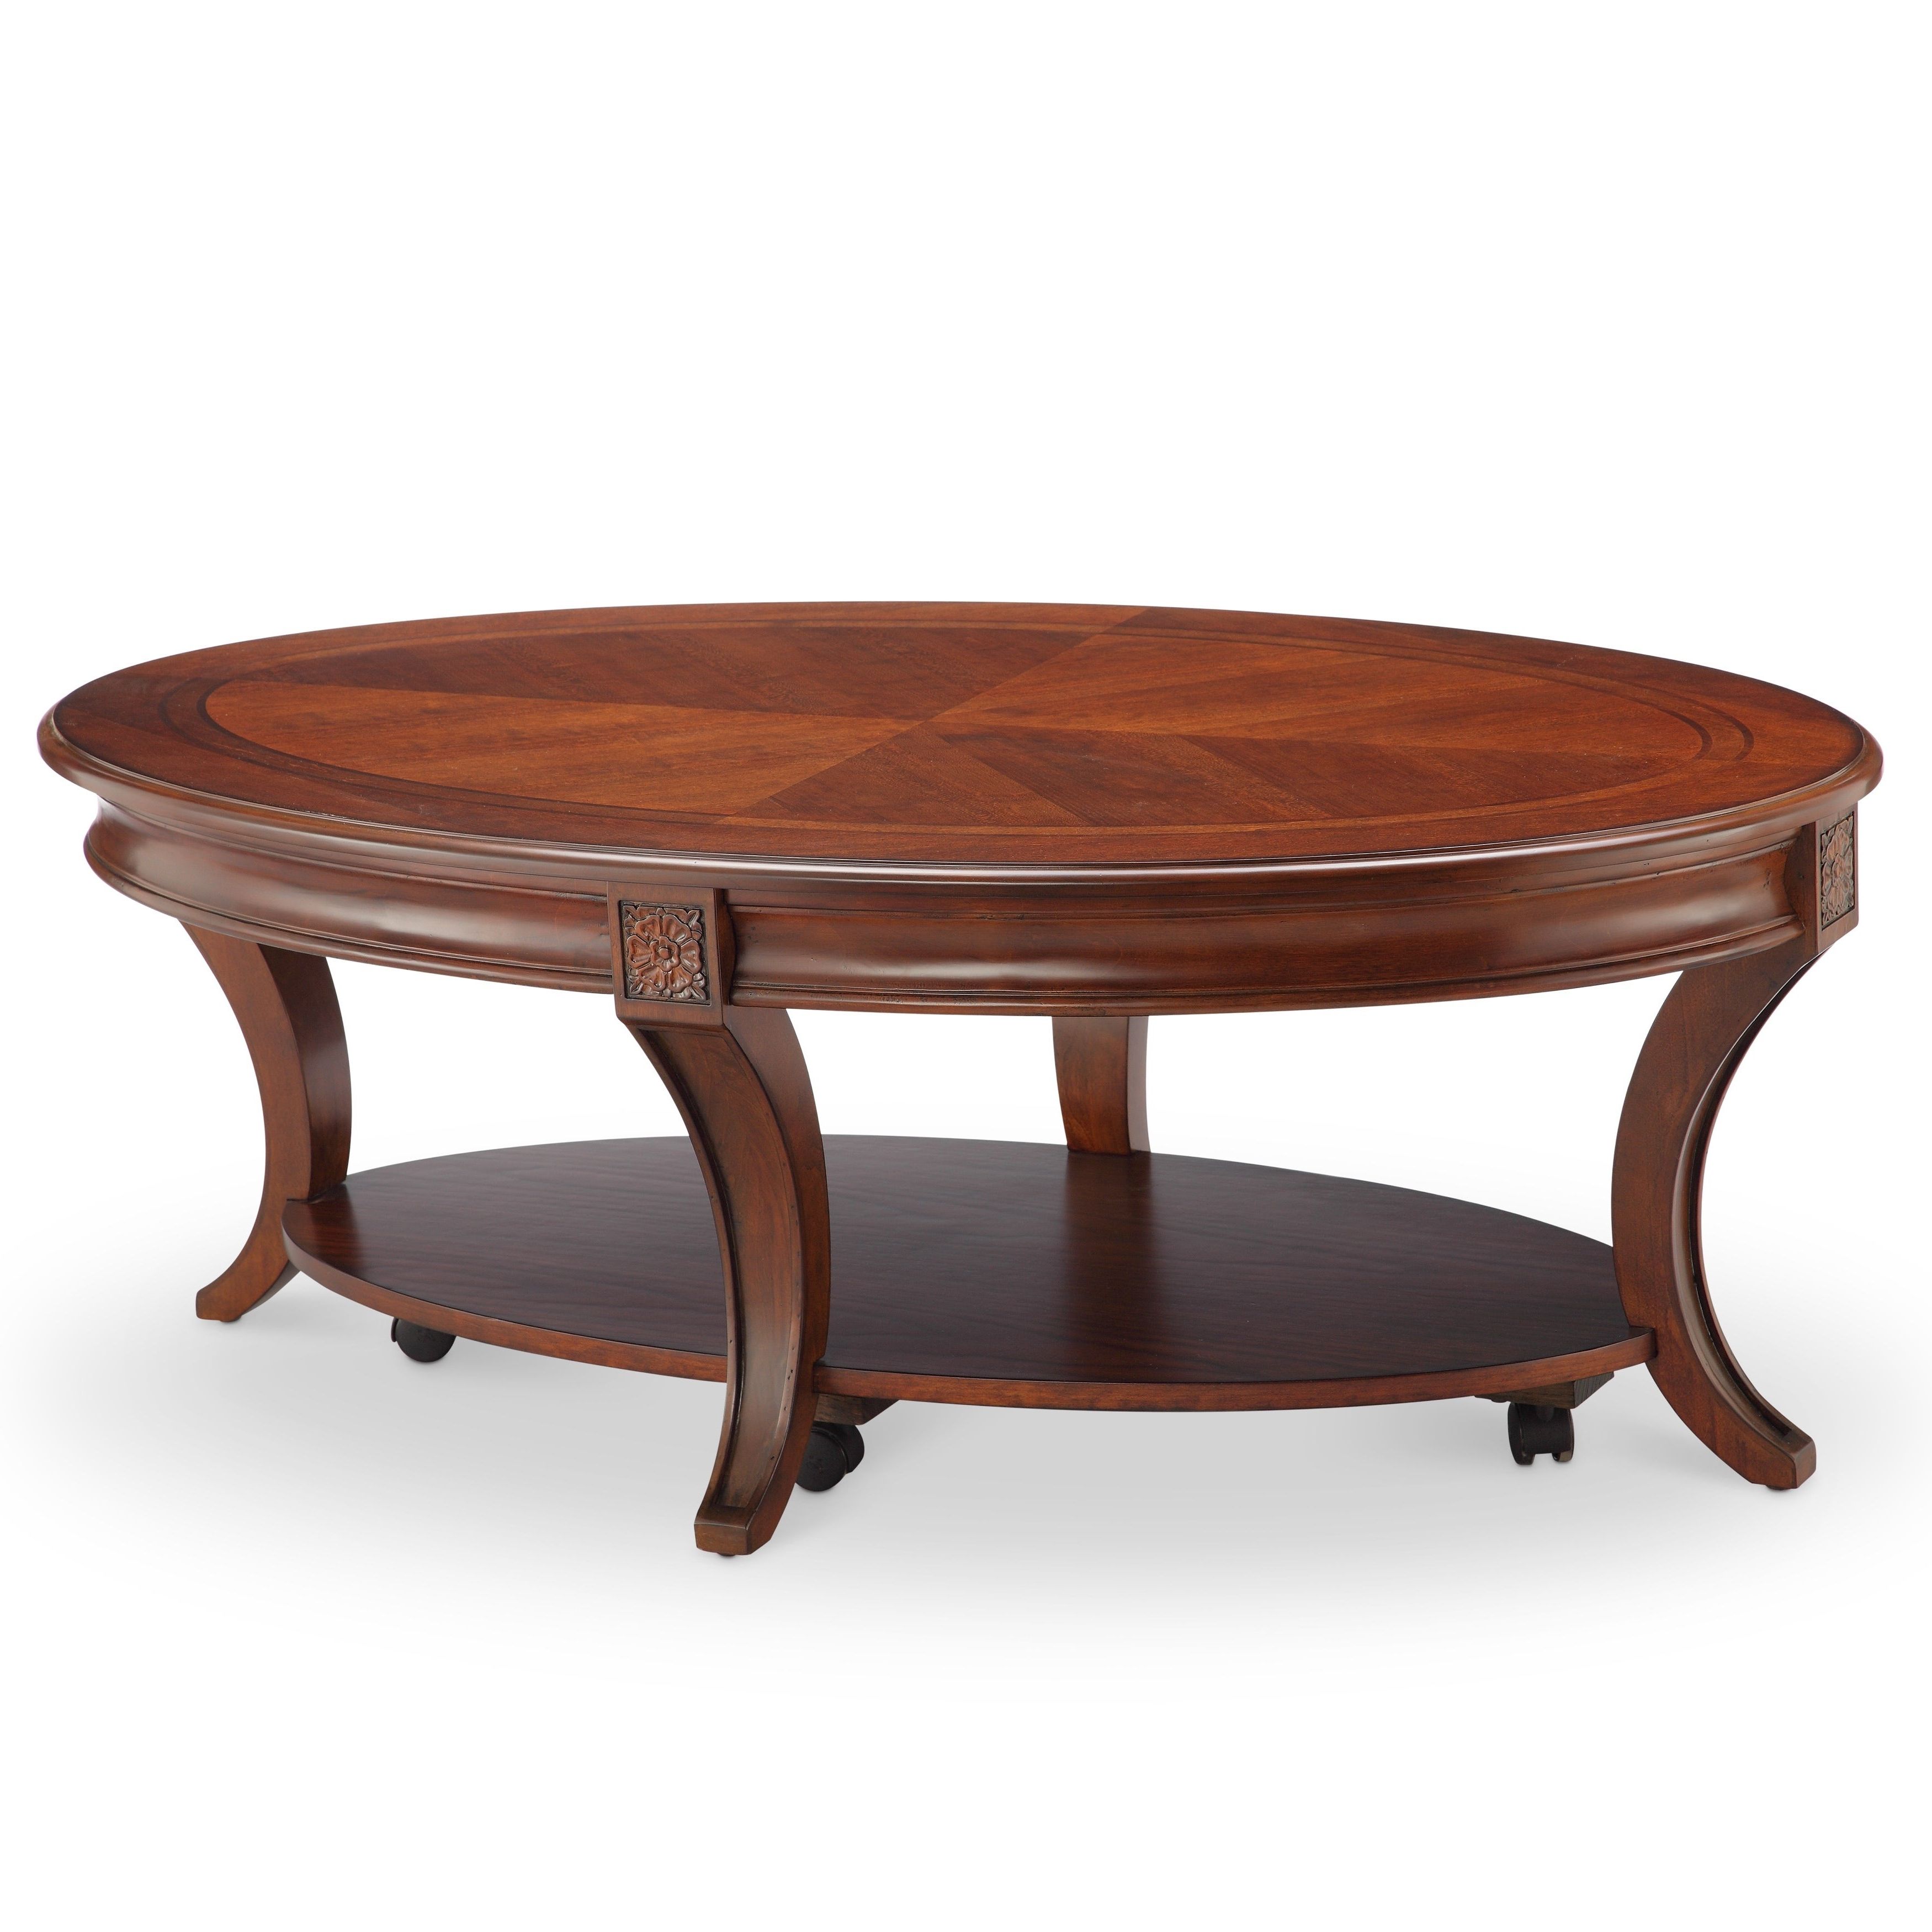 Most Popular Winslet Cherry Finish Wood Oval Coffee Tables With Casters Within Winslet Cherry Finish Wood Oval Coffee Table With Casters (View 1 of 20)